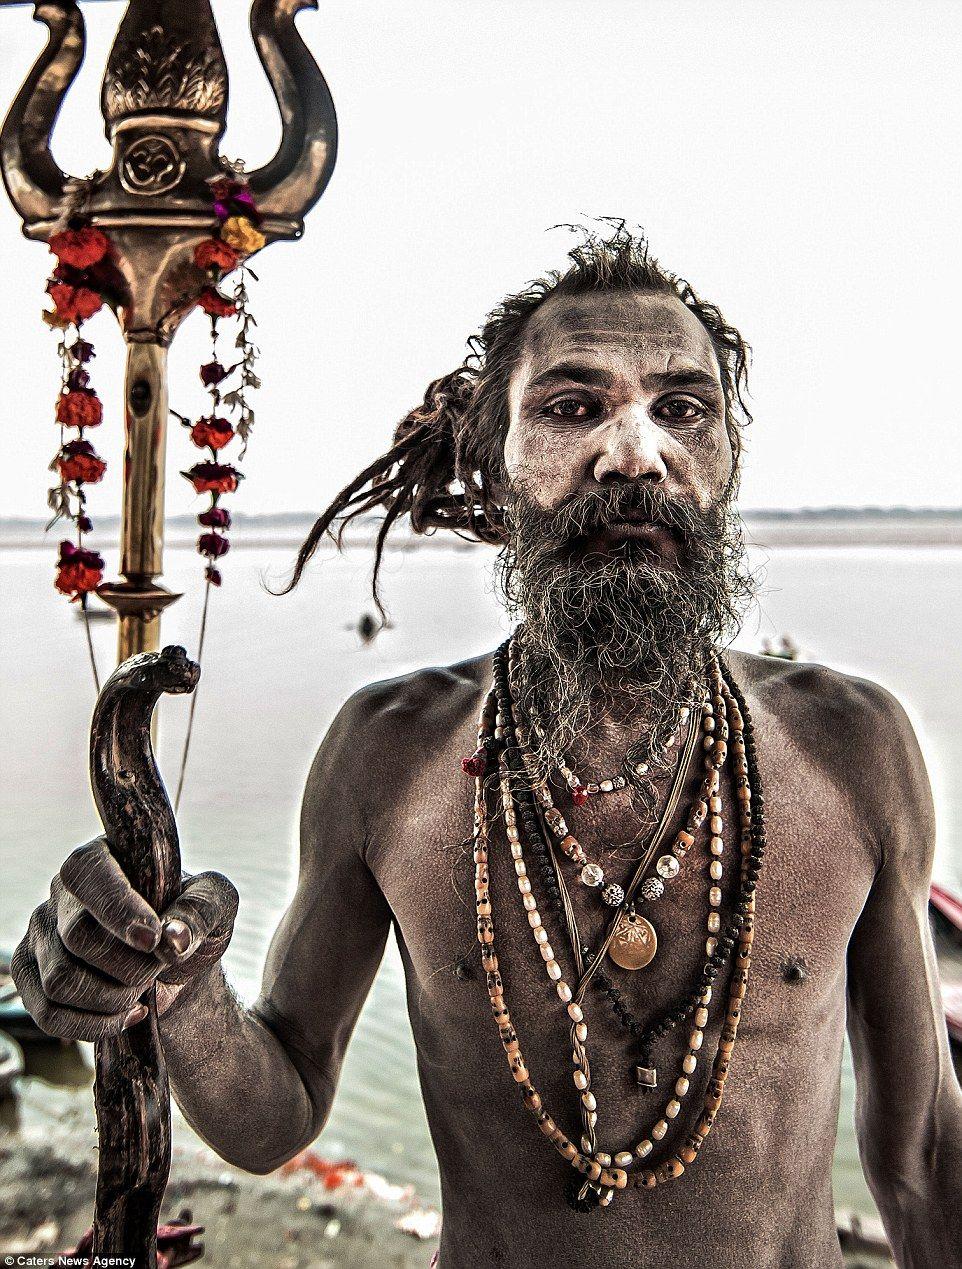 Incredible image show life of India's cannibal Aghori tribe. Daily